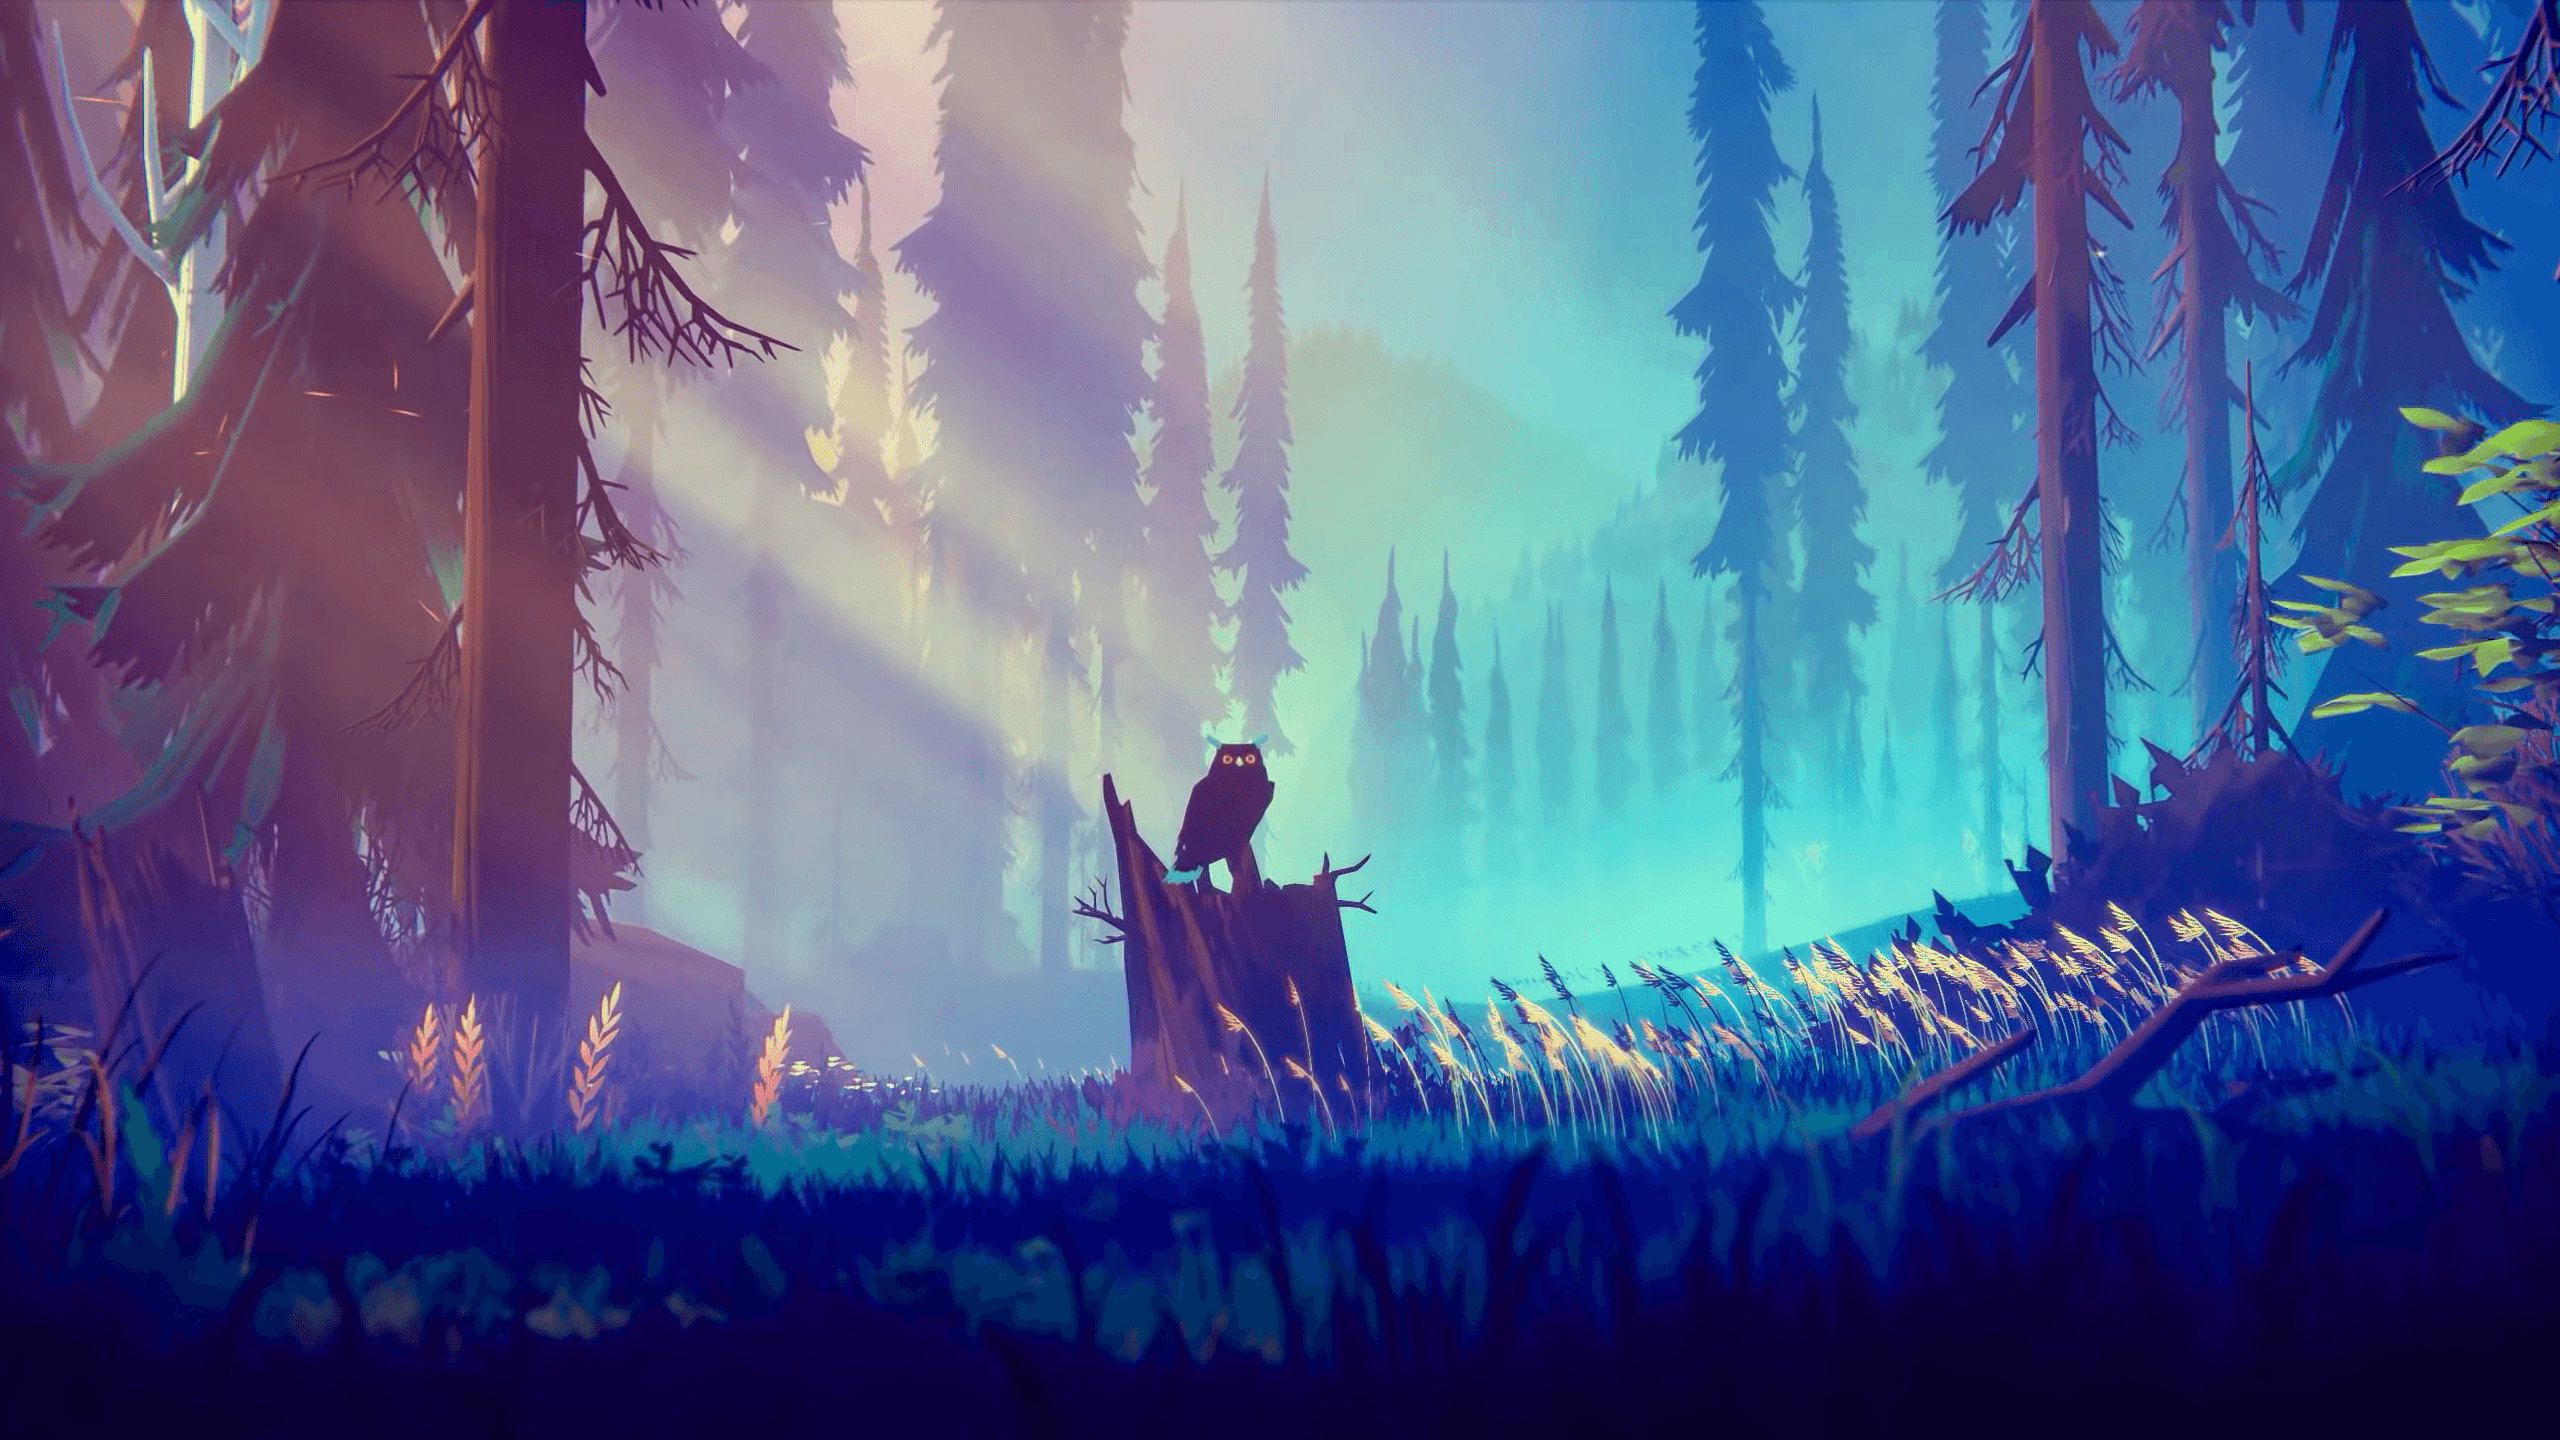 Among Trees Game Wallpapers - Wallpaper Cave.